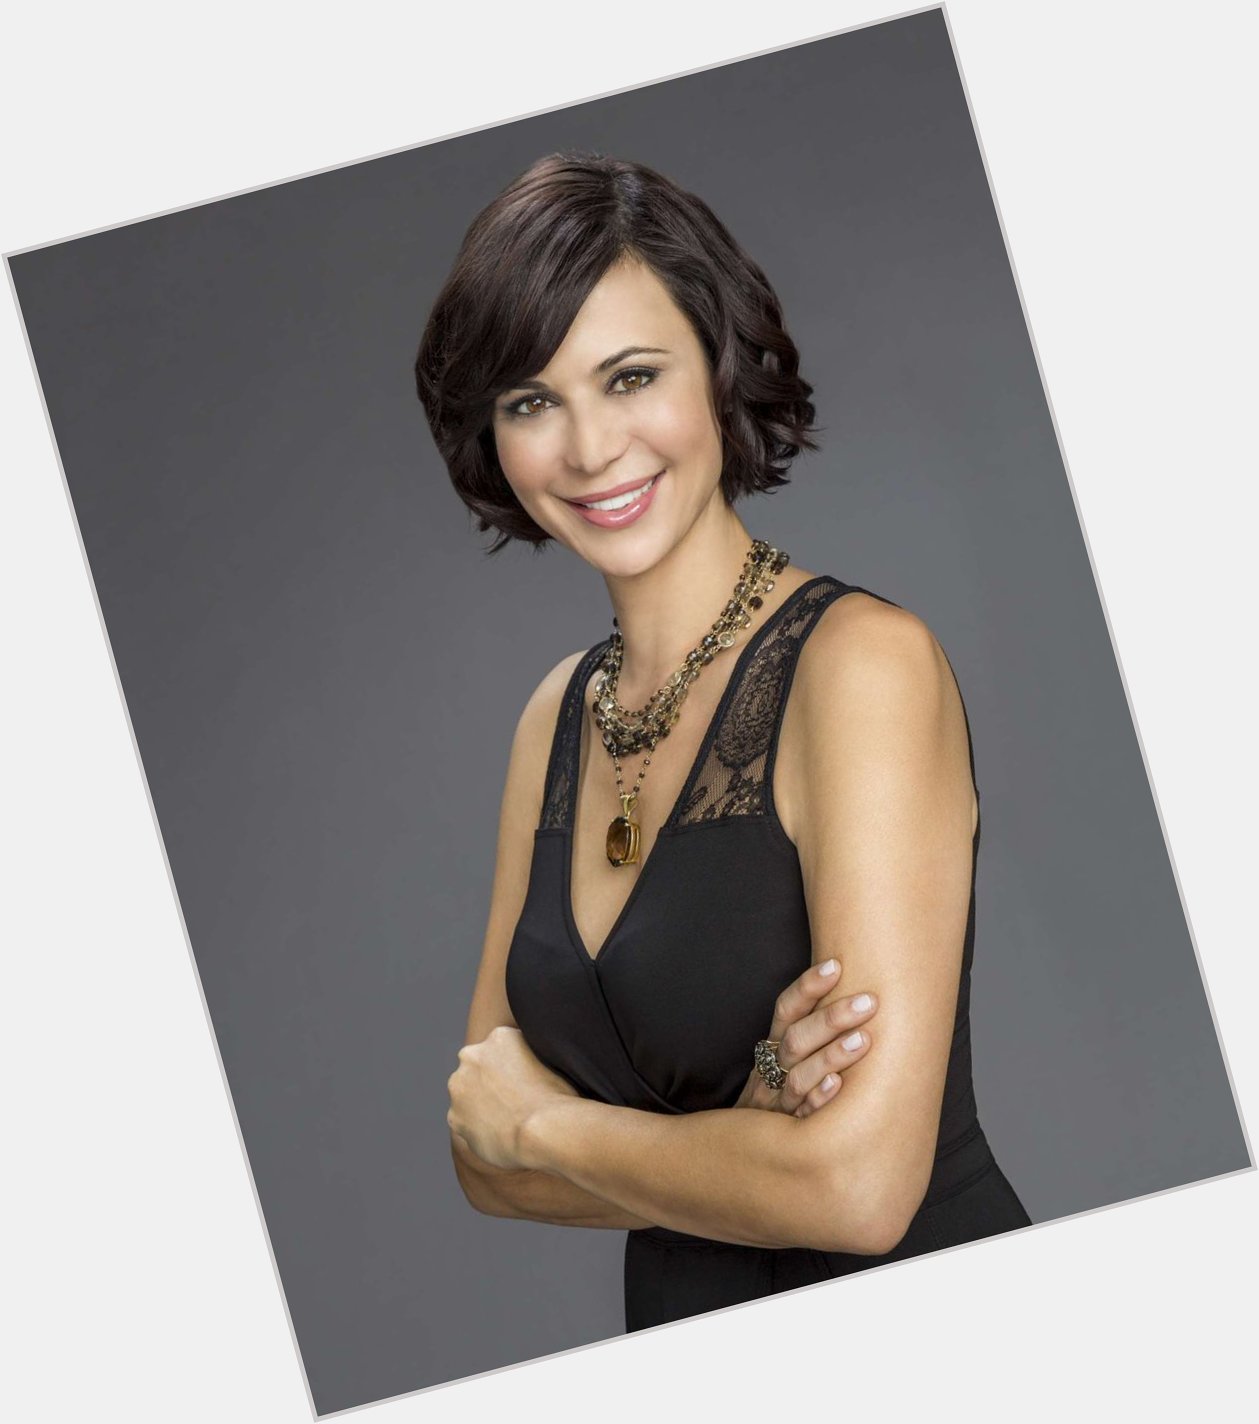 A very HAPPY BIRTHDAY to an amazing actress and naturalized US citizen, Catherine Bell!   